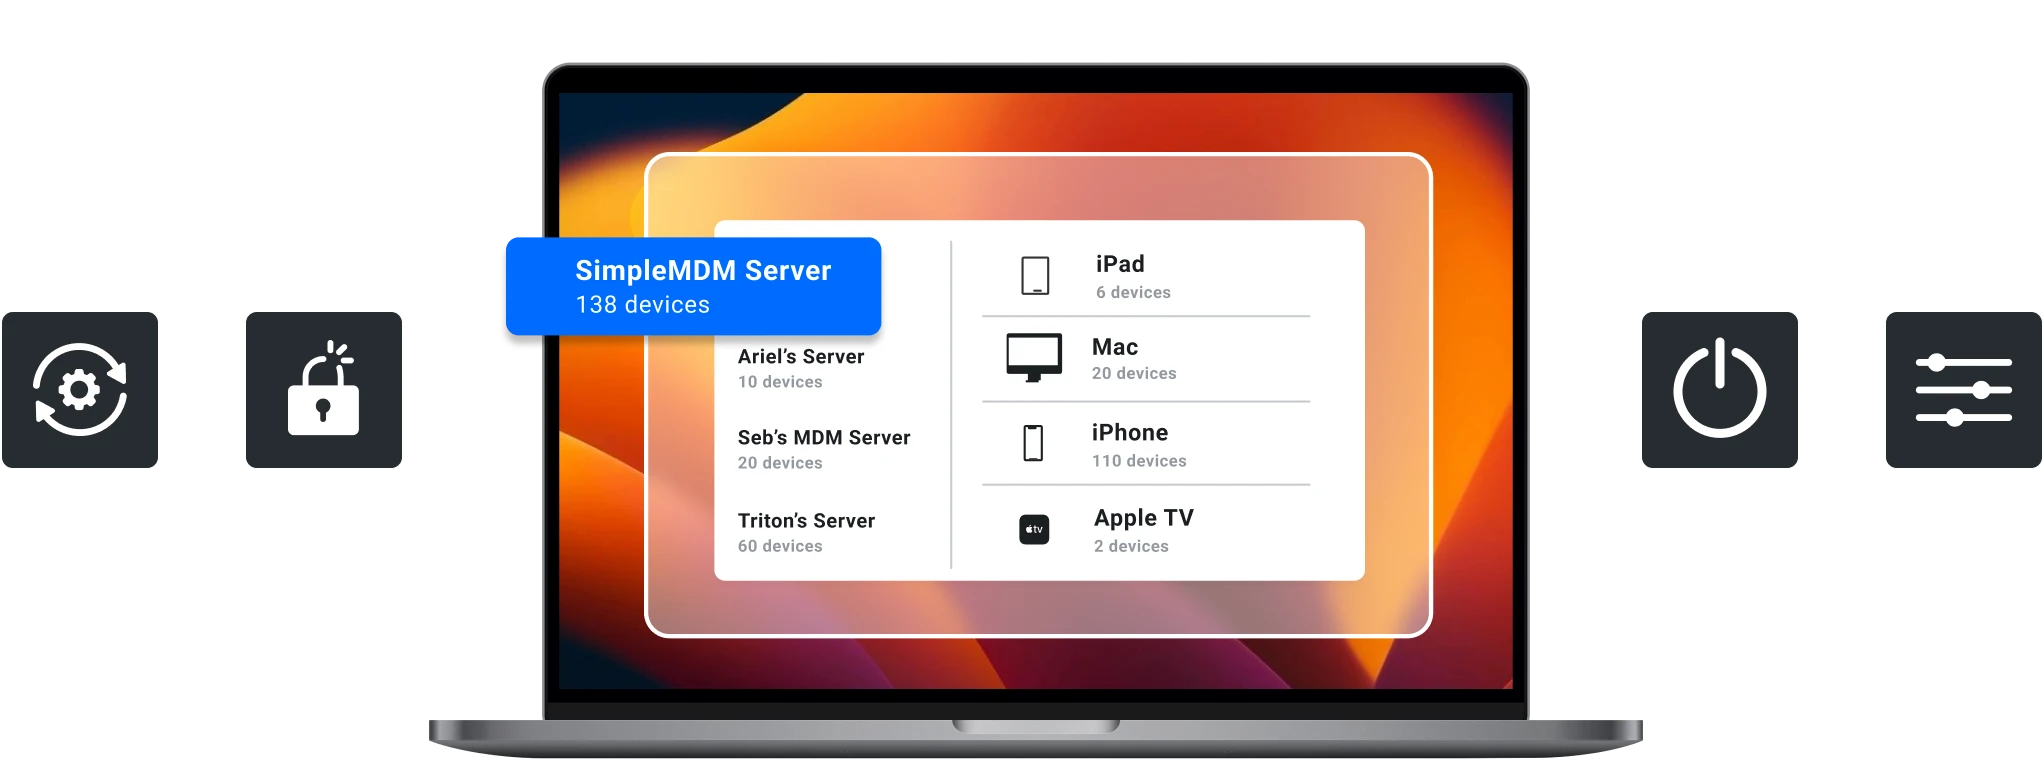 Image of MacBook laptop displaying what devices and how many devices are on individual servers